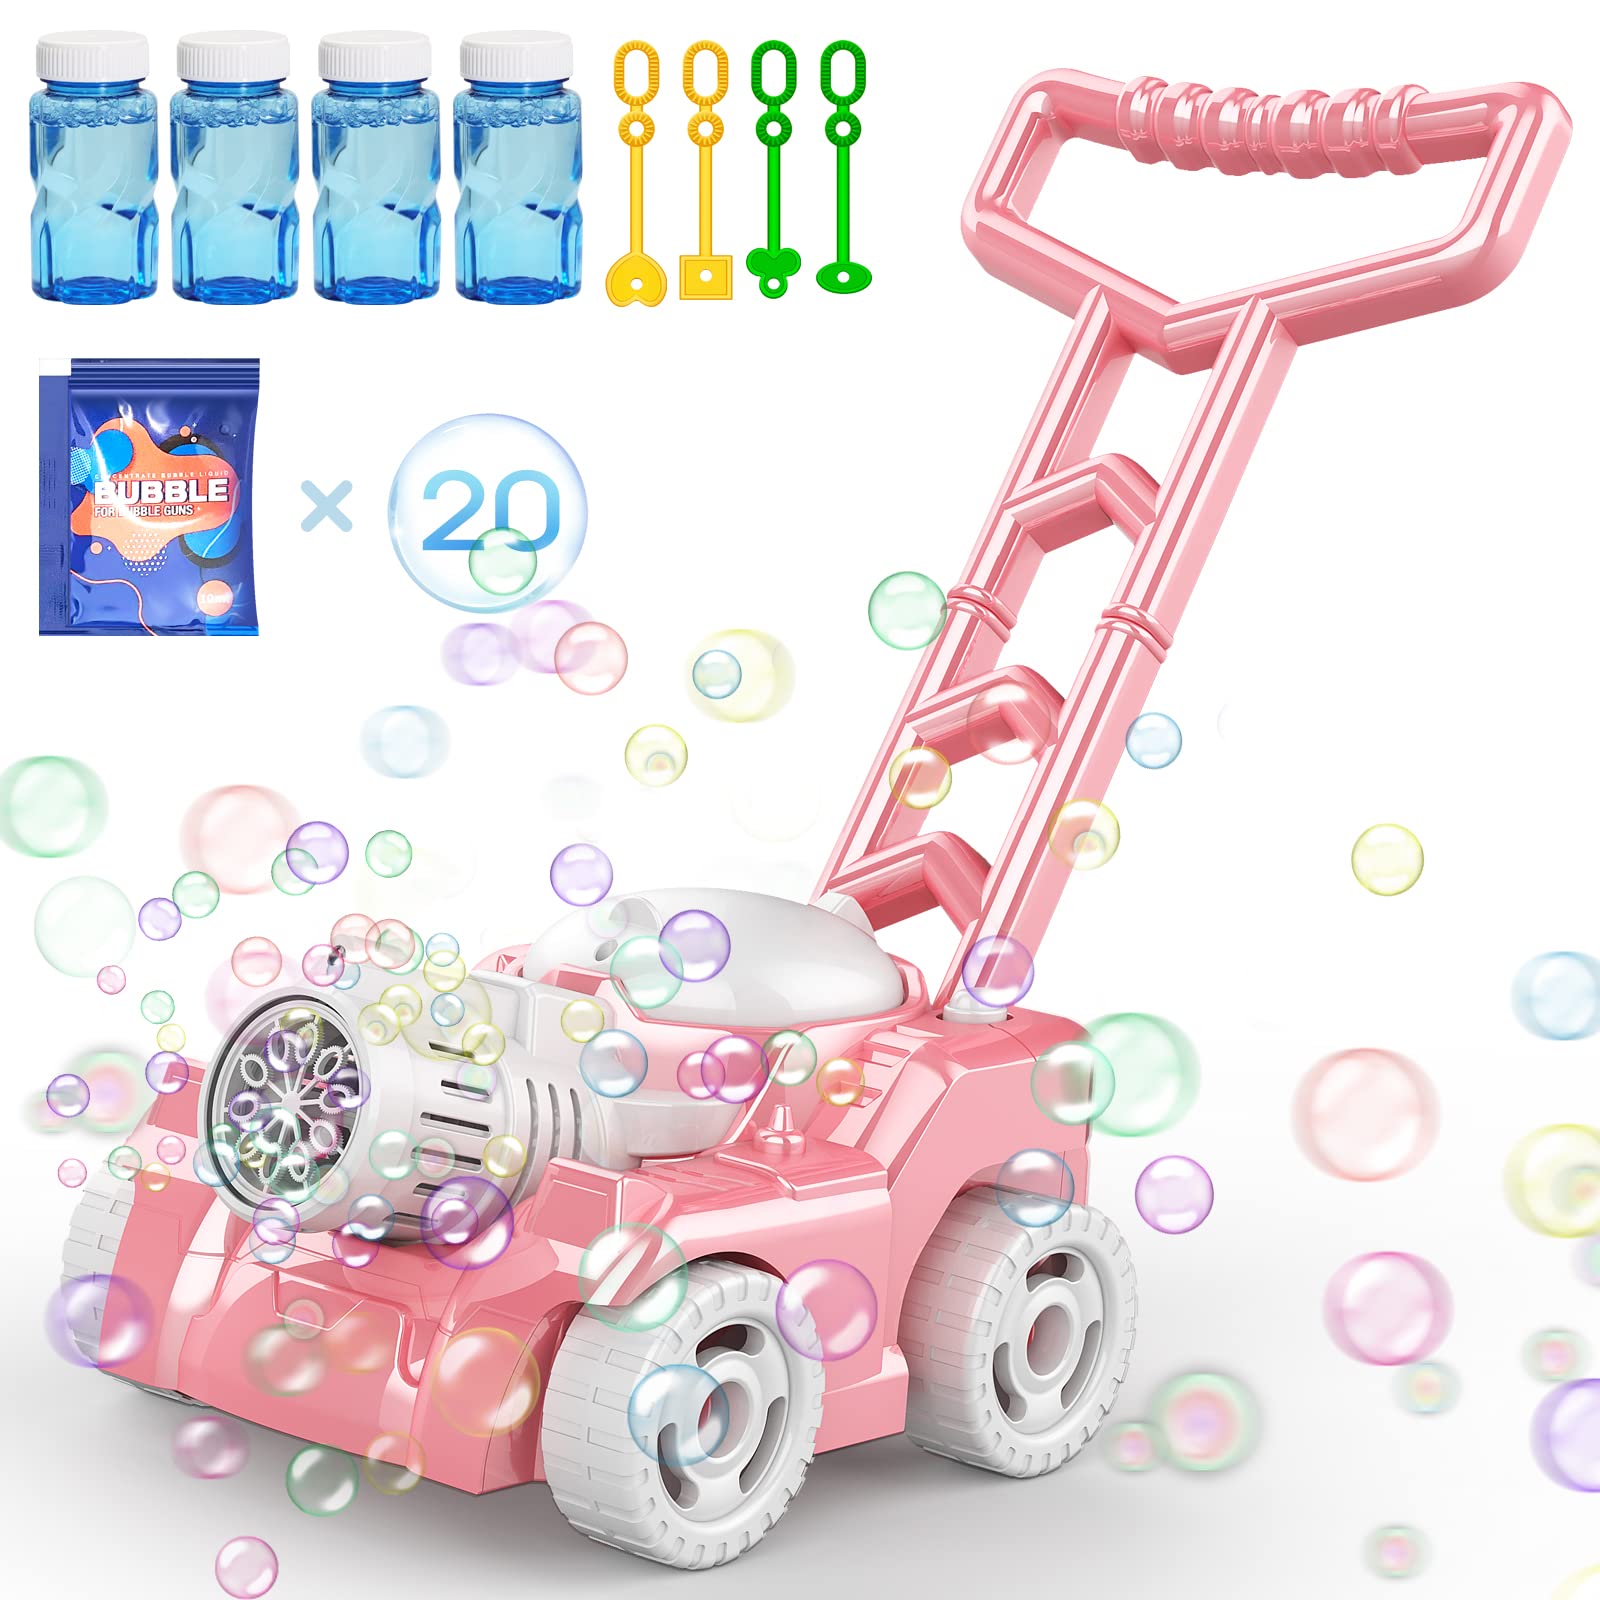 Bubble Machine,Bubble Blower Maker,Bubble Lawn Mower for Toddlers 1-3,Summer Outdoor Push Backyard Toys,Wedding Party Favors,Christmas Birthday Gifts for Preschool Baby Boys Girls…